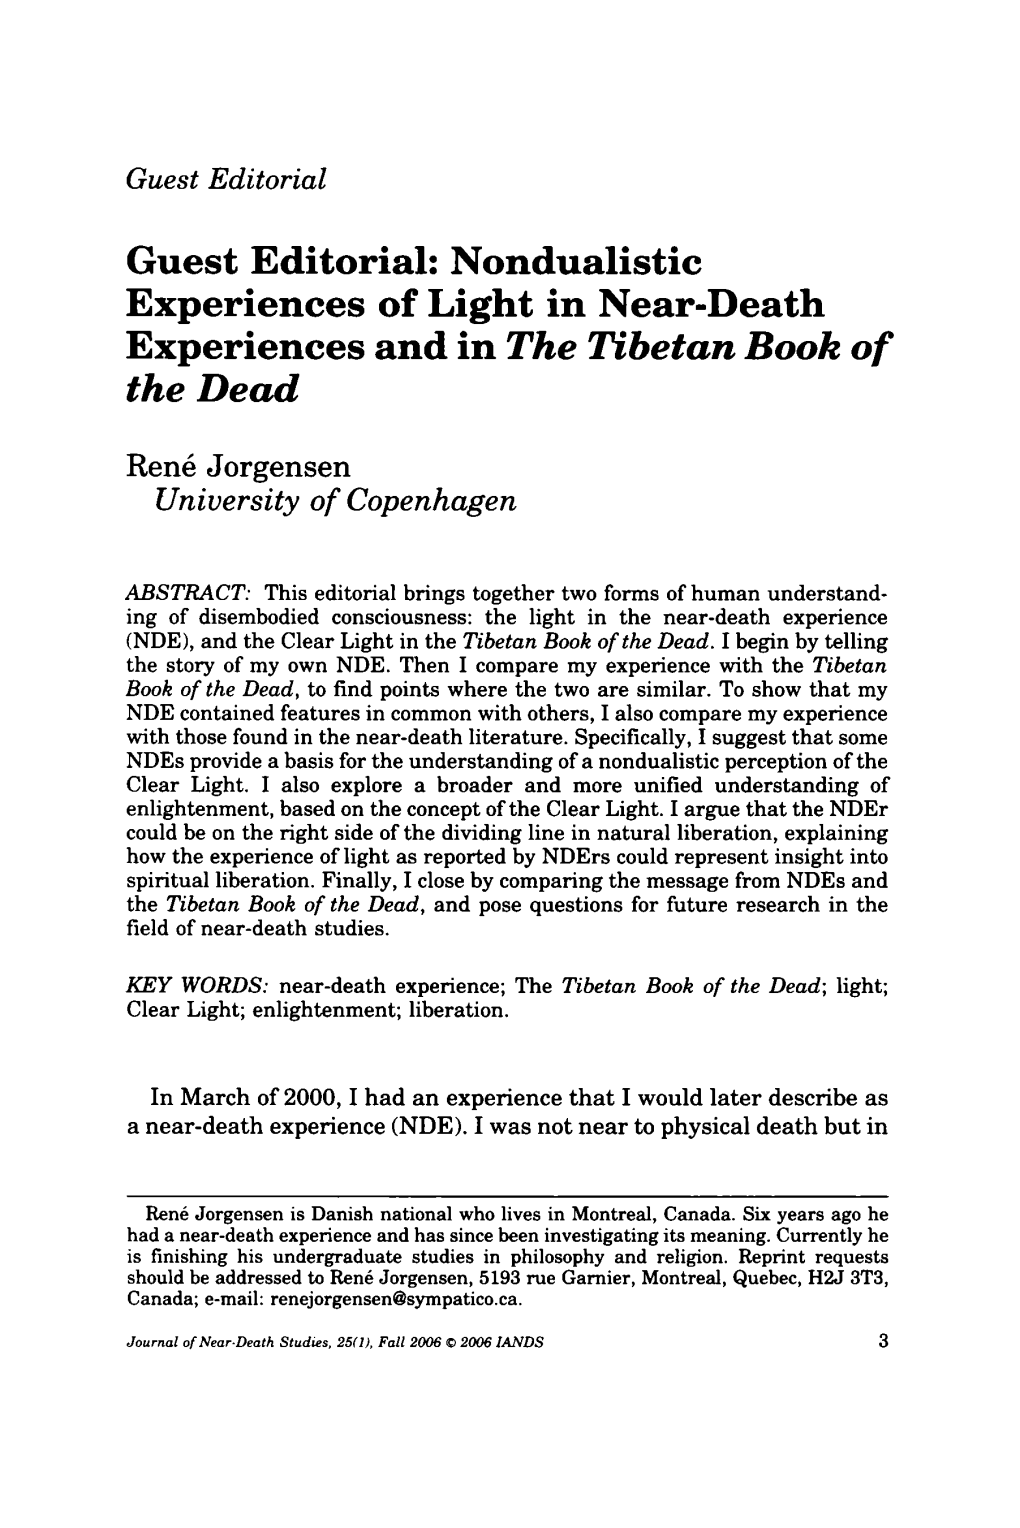 Guest Editorial: Nondualistic Experiences of Light in Near-Death Experiences and in the Tibetan Book of the Dead